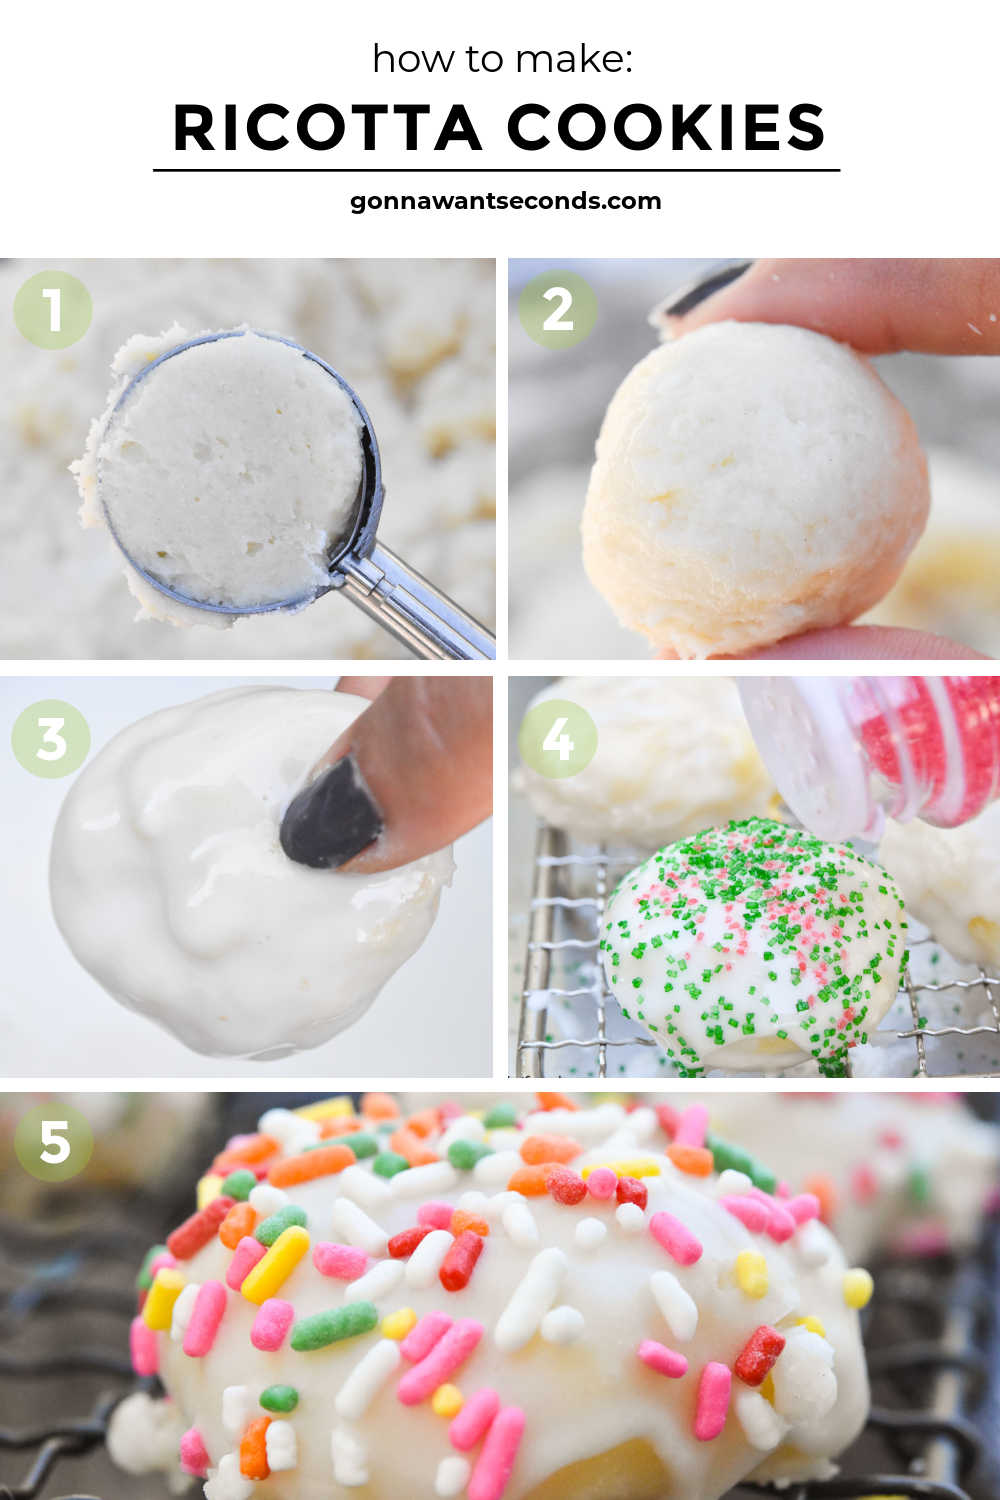 Step by step how to make ricotta cookies